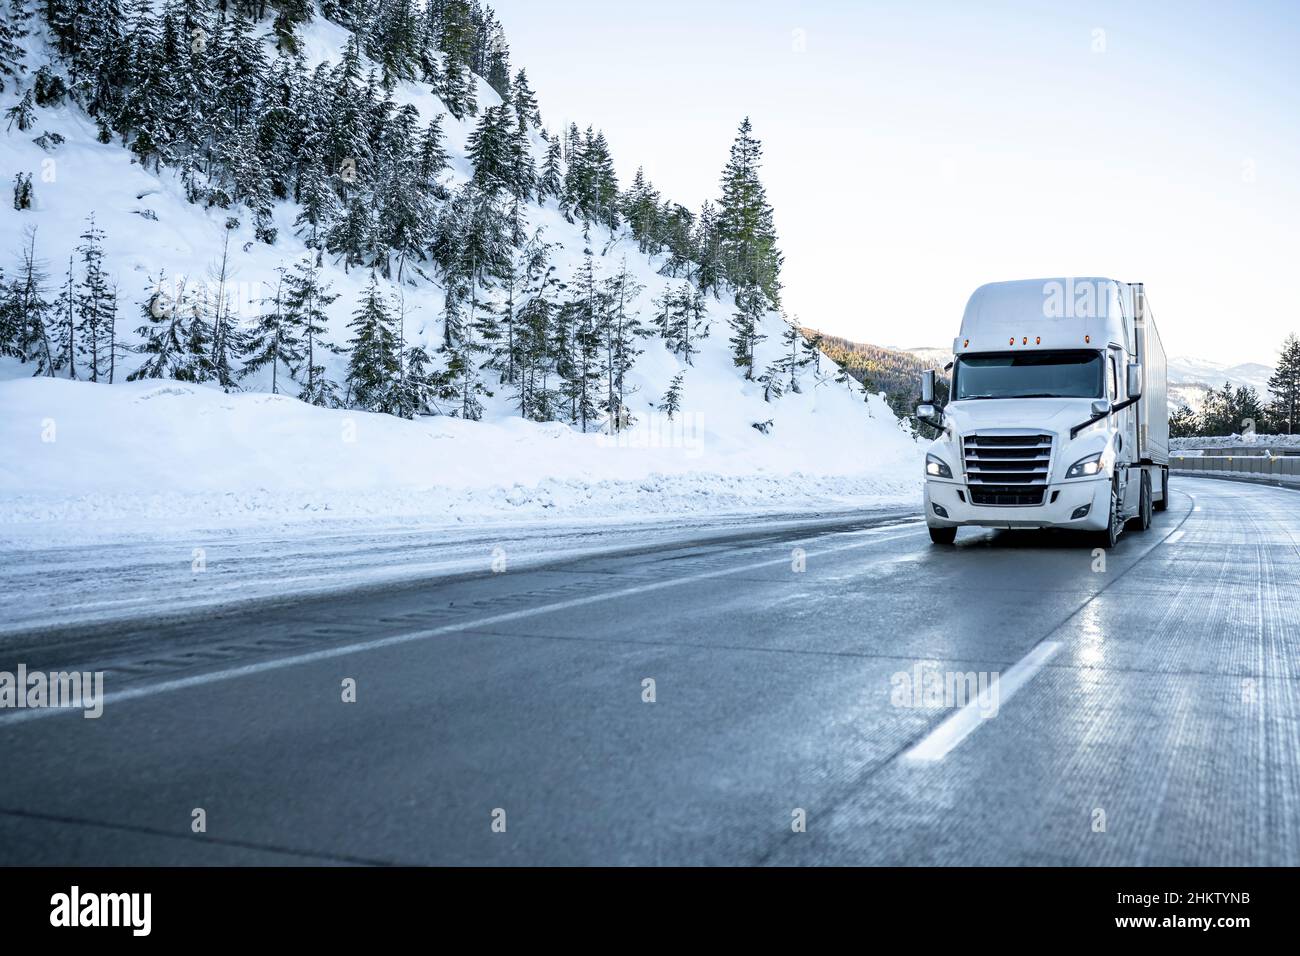 White big rig industrial semi truck transporting cargo in dry van semi trailer running on the winding winter dangerous slippery road with snow and ice Stock Photo